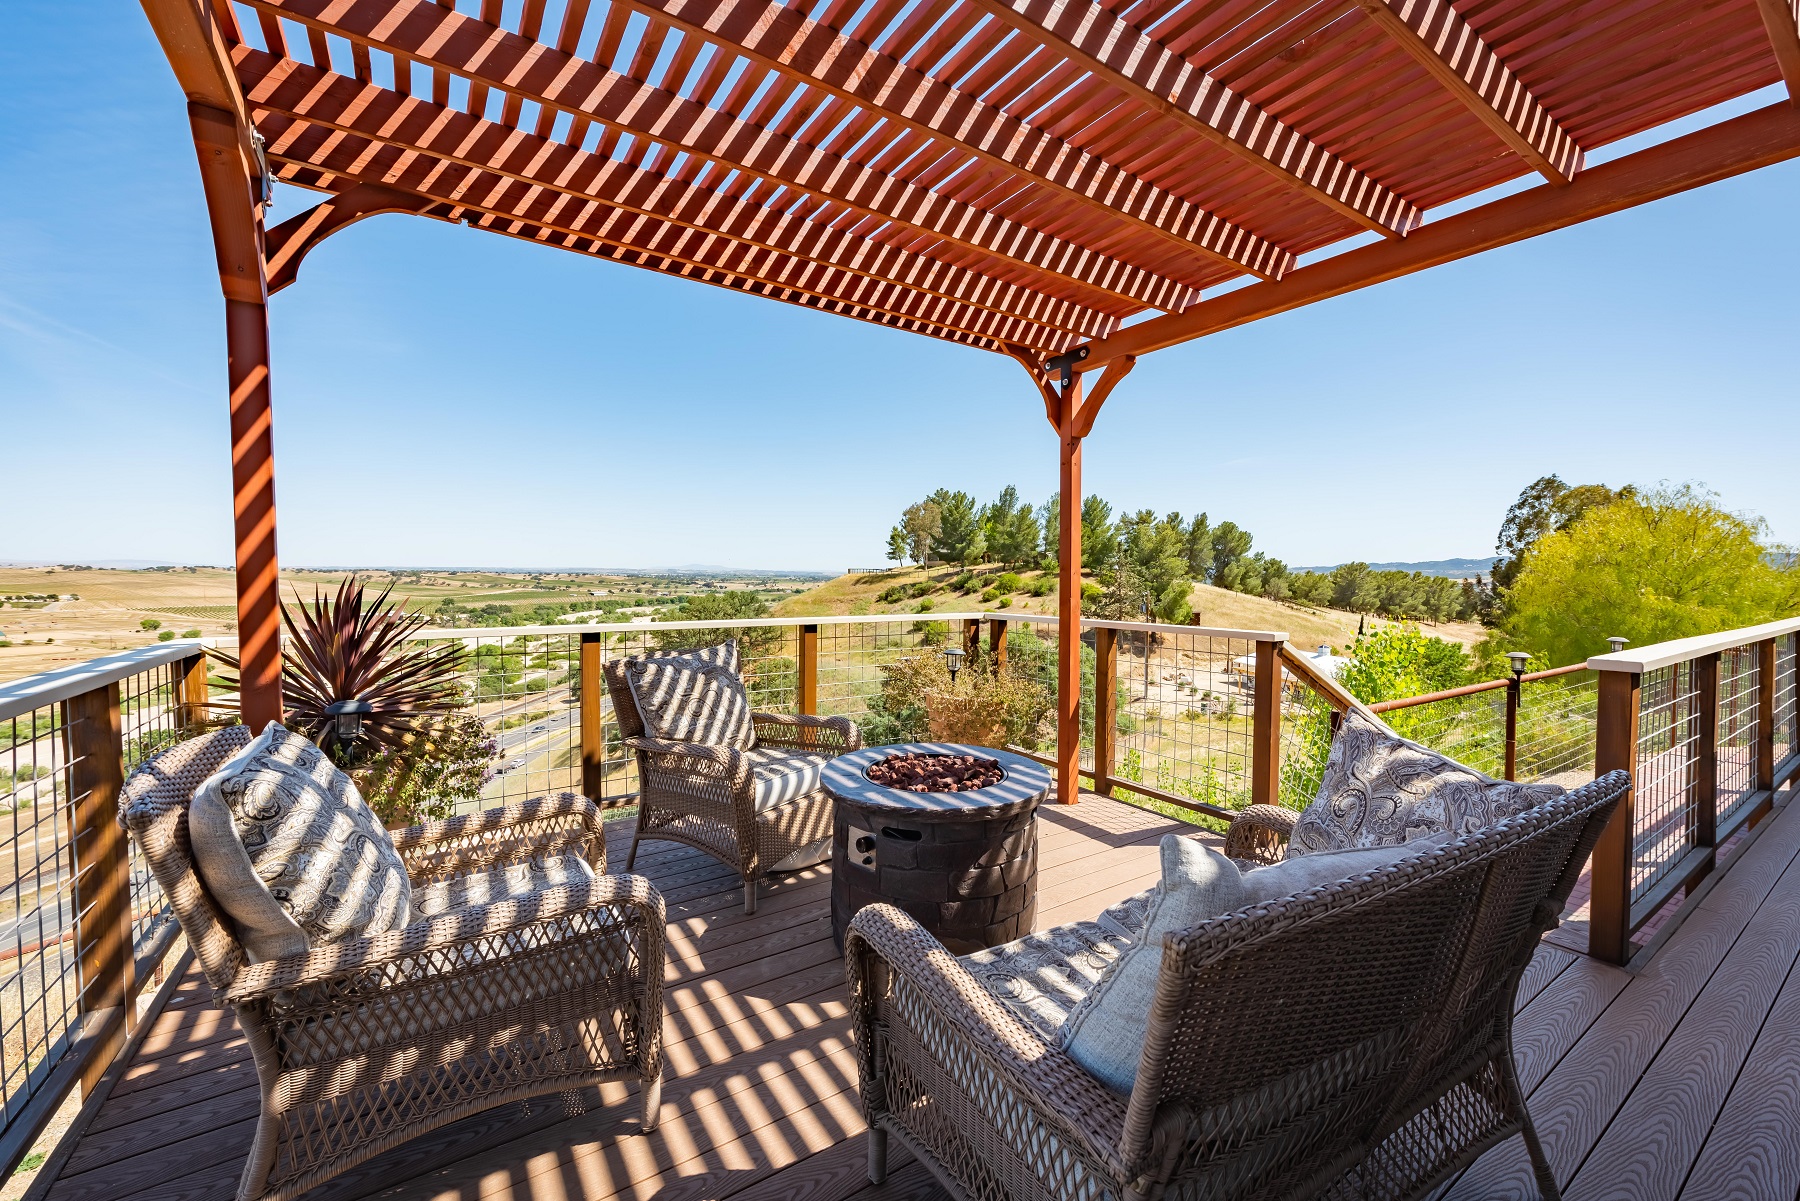 Enjoy views of vines, horses and rolling hill vistas.